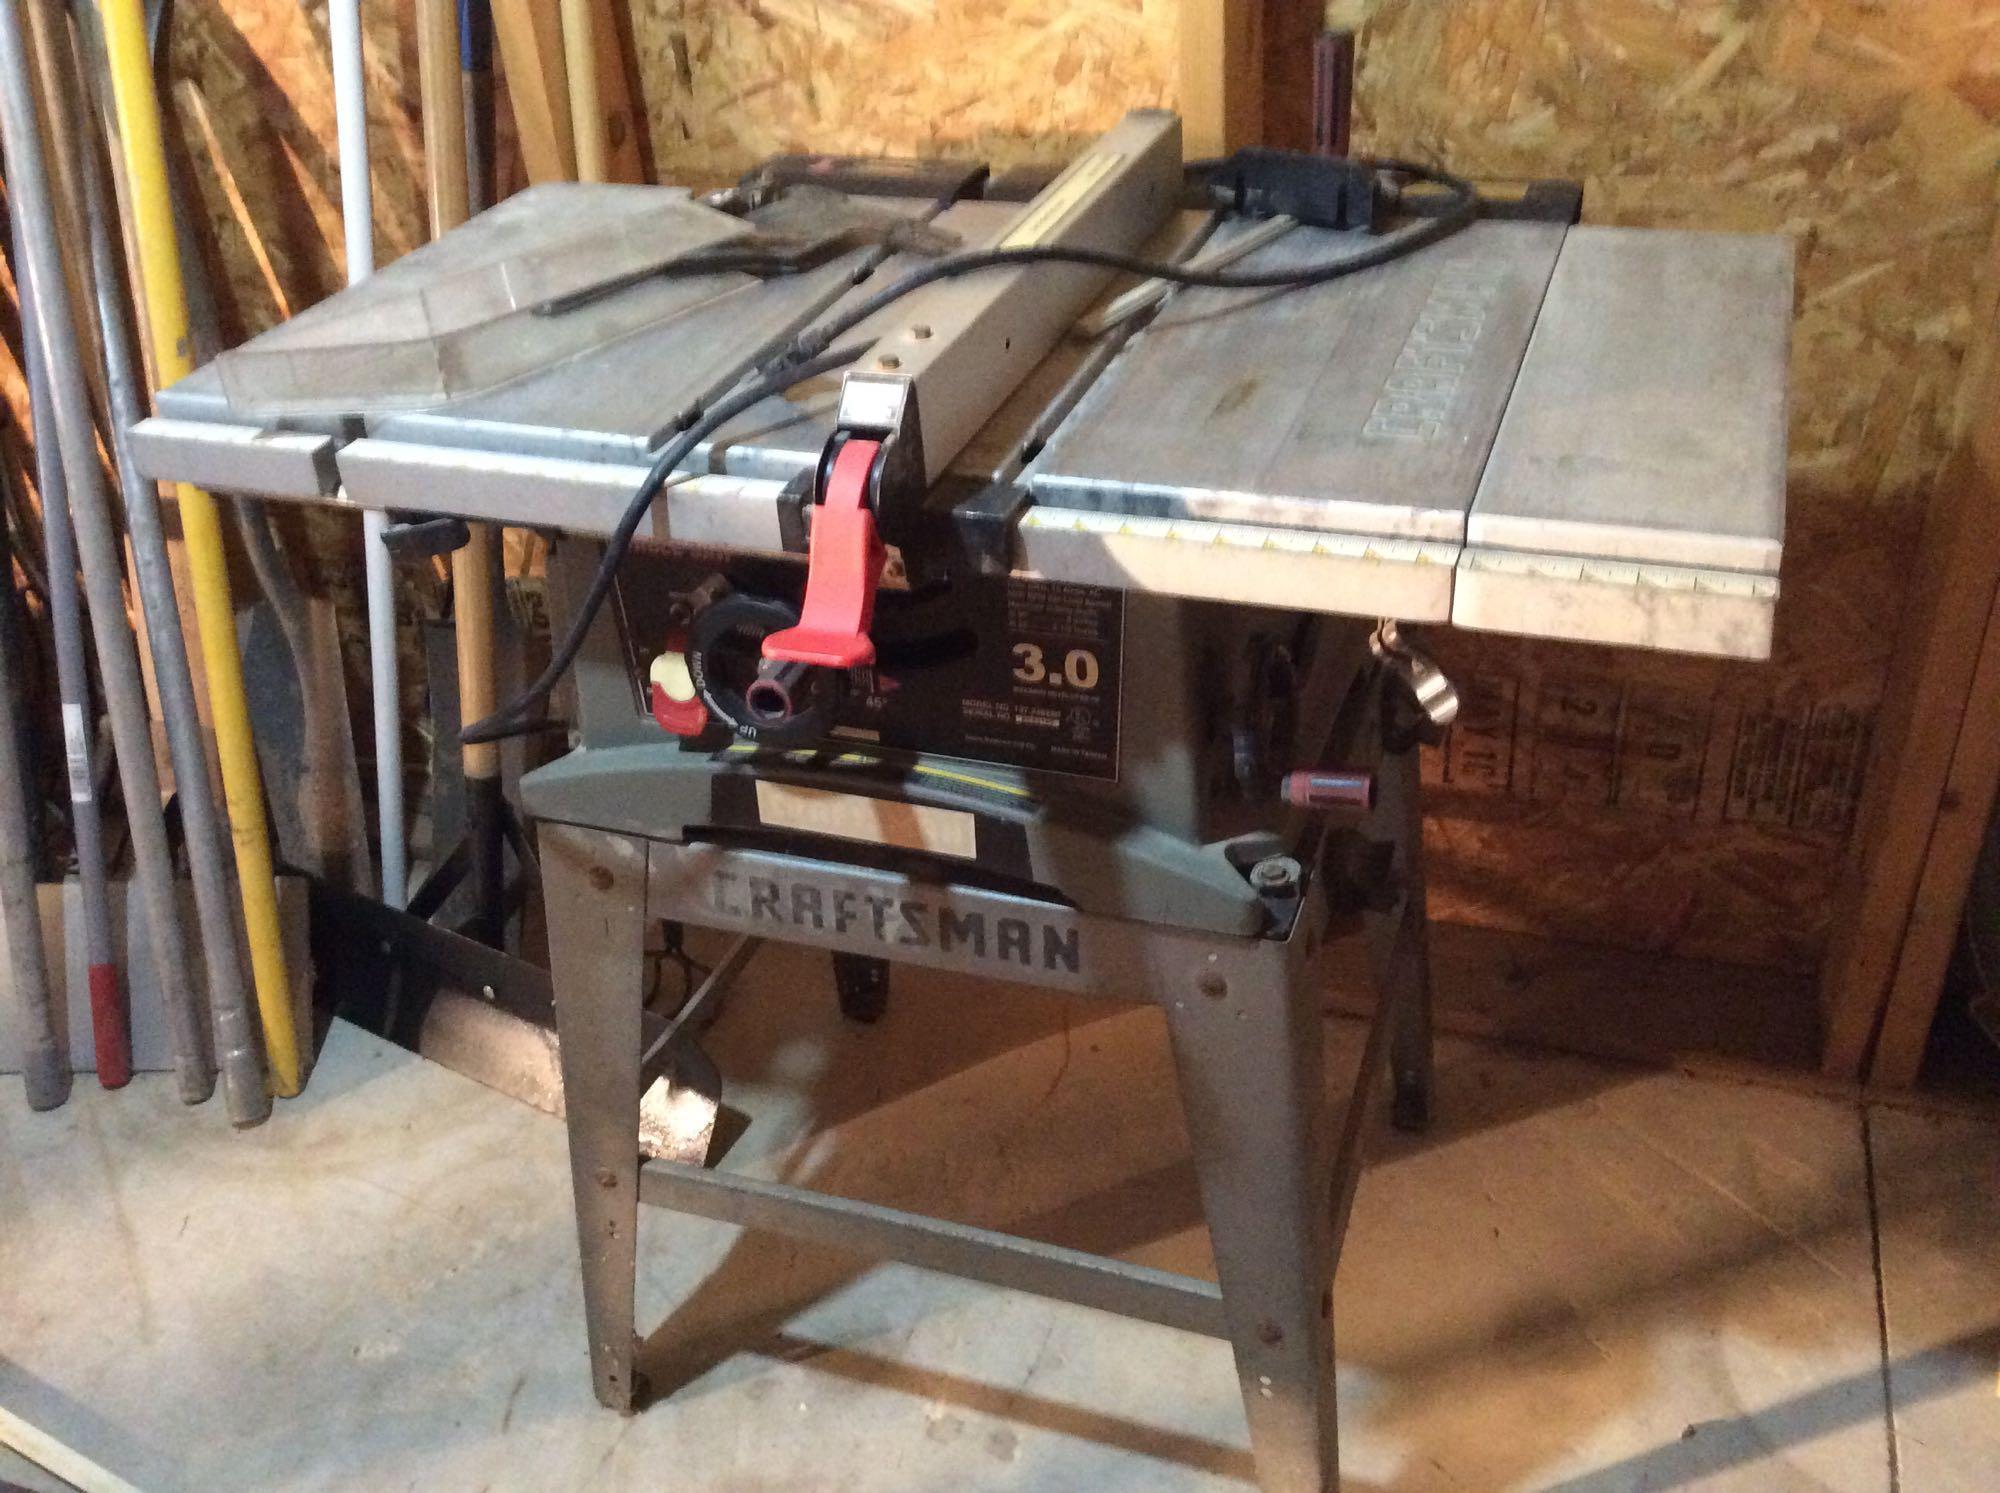 Craftsman table saw with fence